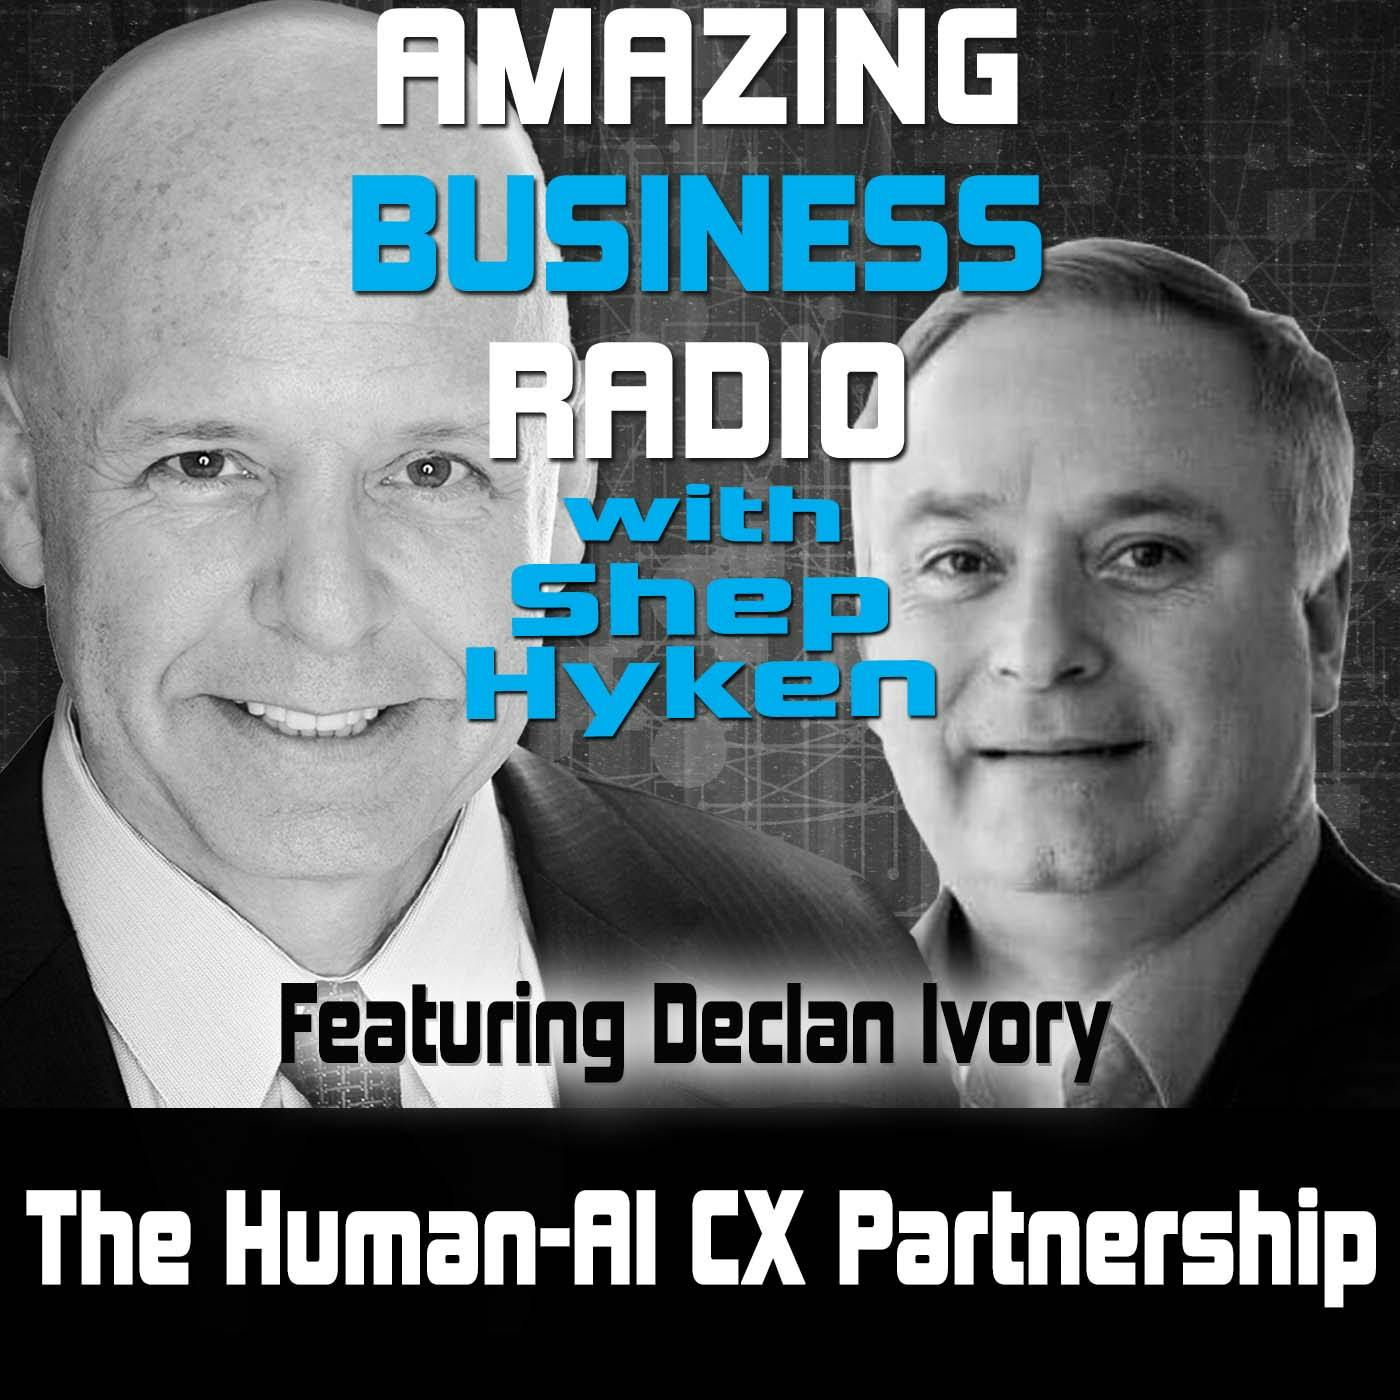 The Human-AI CX Partnership Featuring Declan Ivory